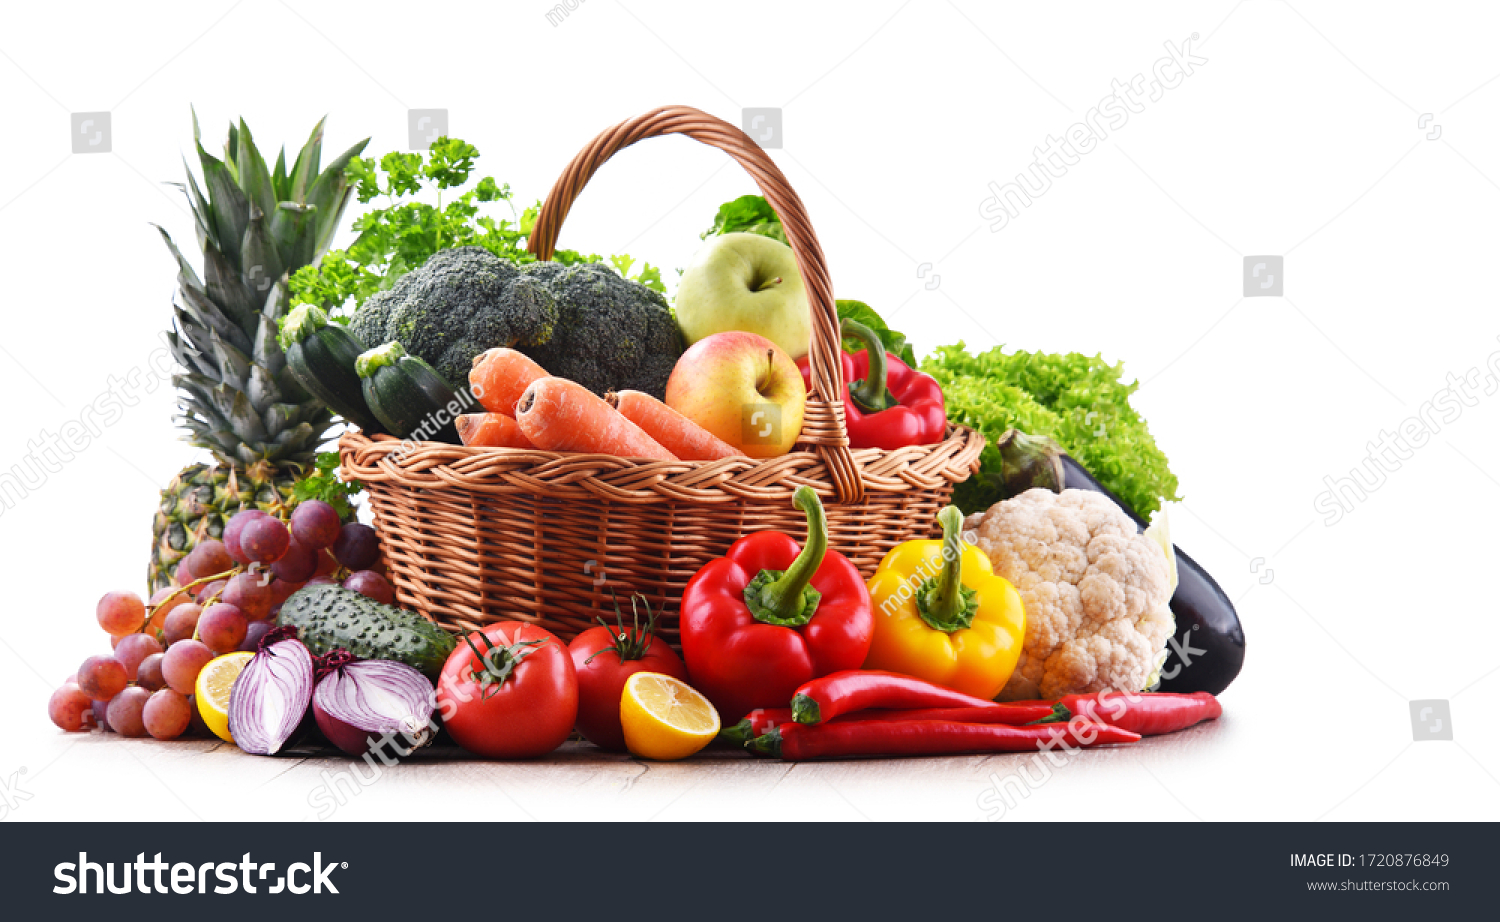 Assorted organic vegetables and fruits in wicker basket isolated on white background. #1720876849